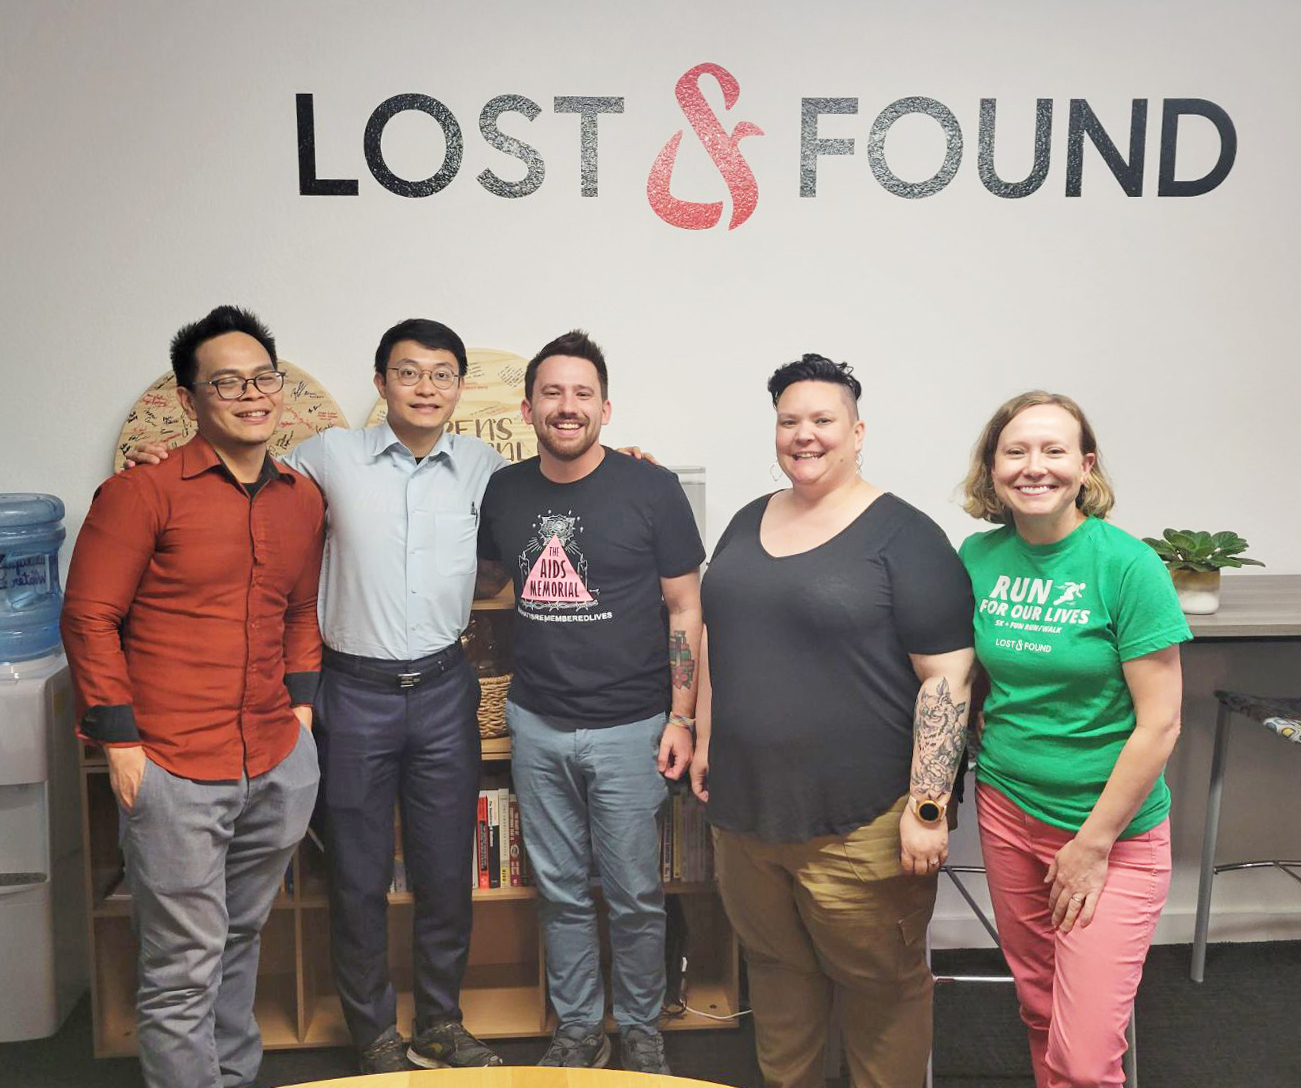 The fellows took pictures with Lost&Found staff during their last week here. PIctured from left are Benny Prawira, Sean Thum, Cody Ingle, Melissa Renes, and Gesine Ziebarth.